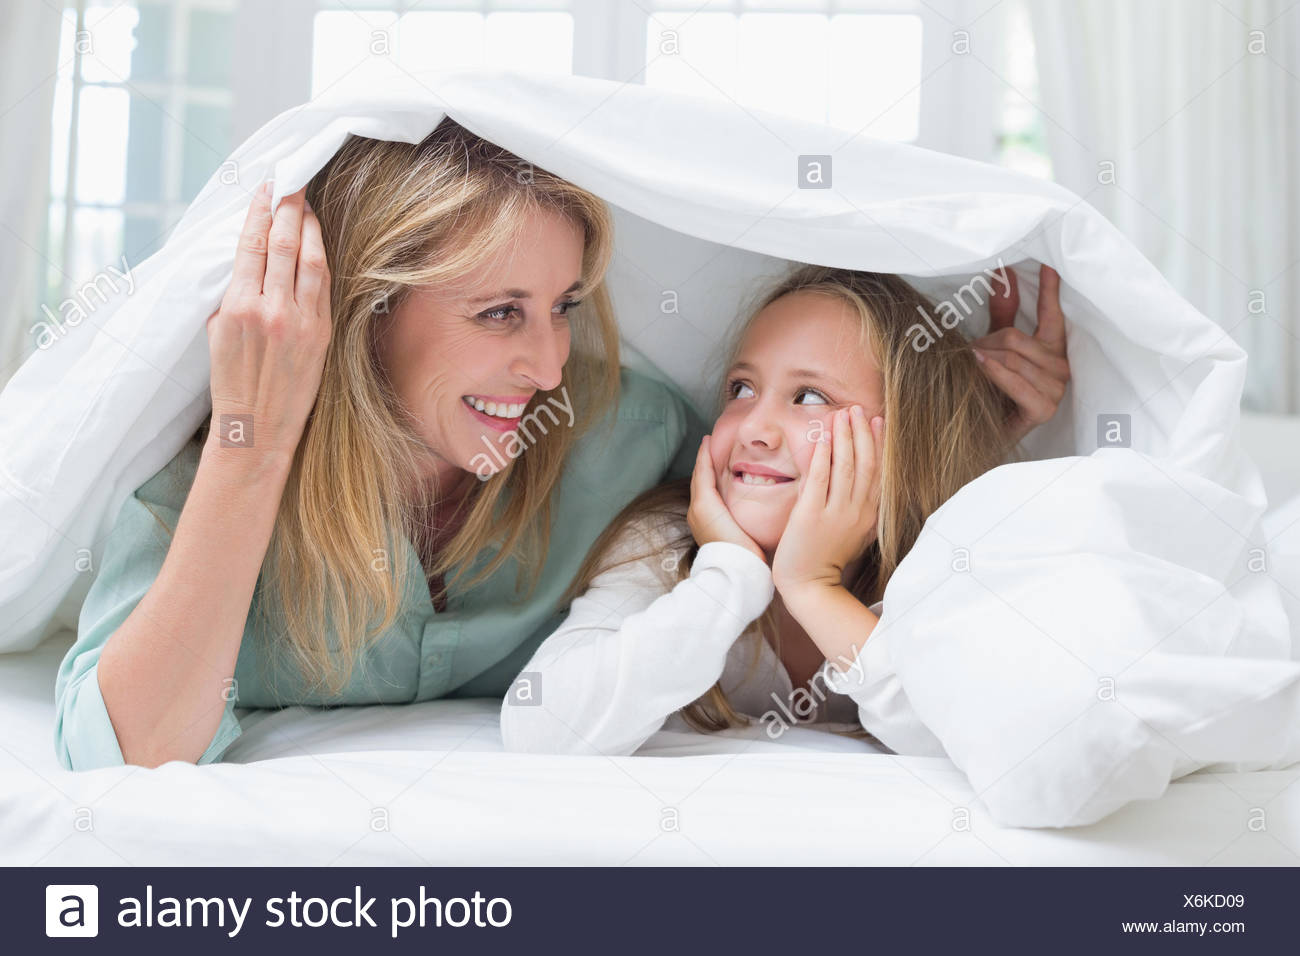 mother and daughter dating each other